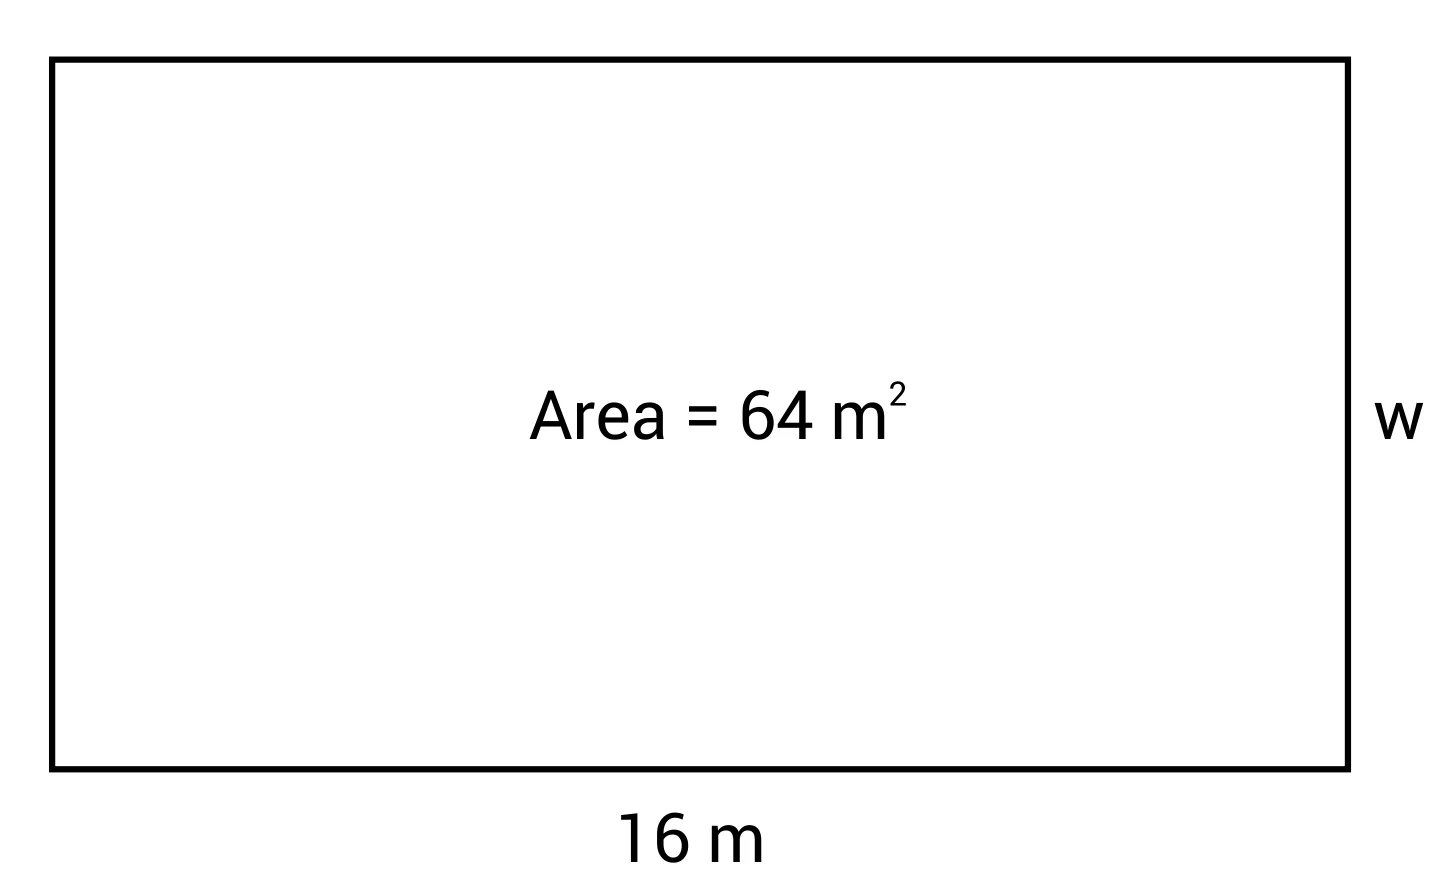 How To Find the Perimeter of a Rectangle (Formula & Video)